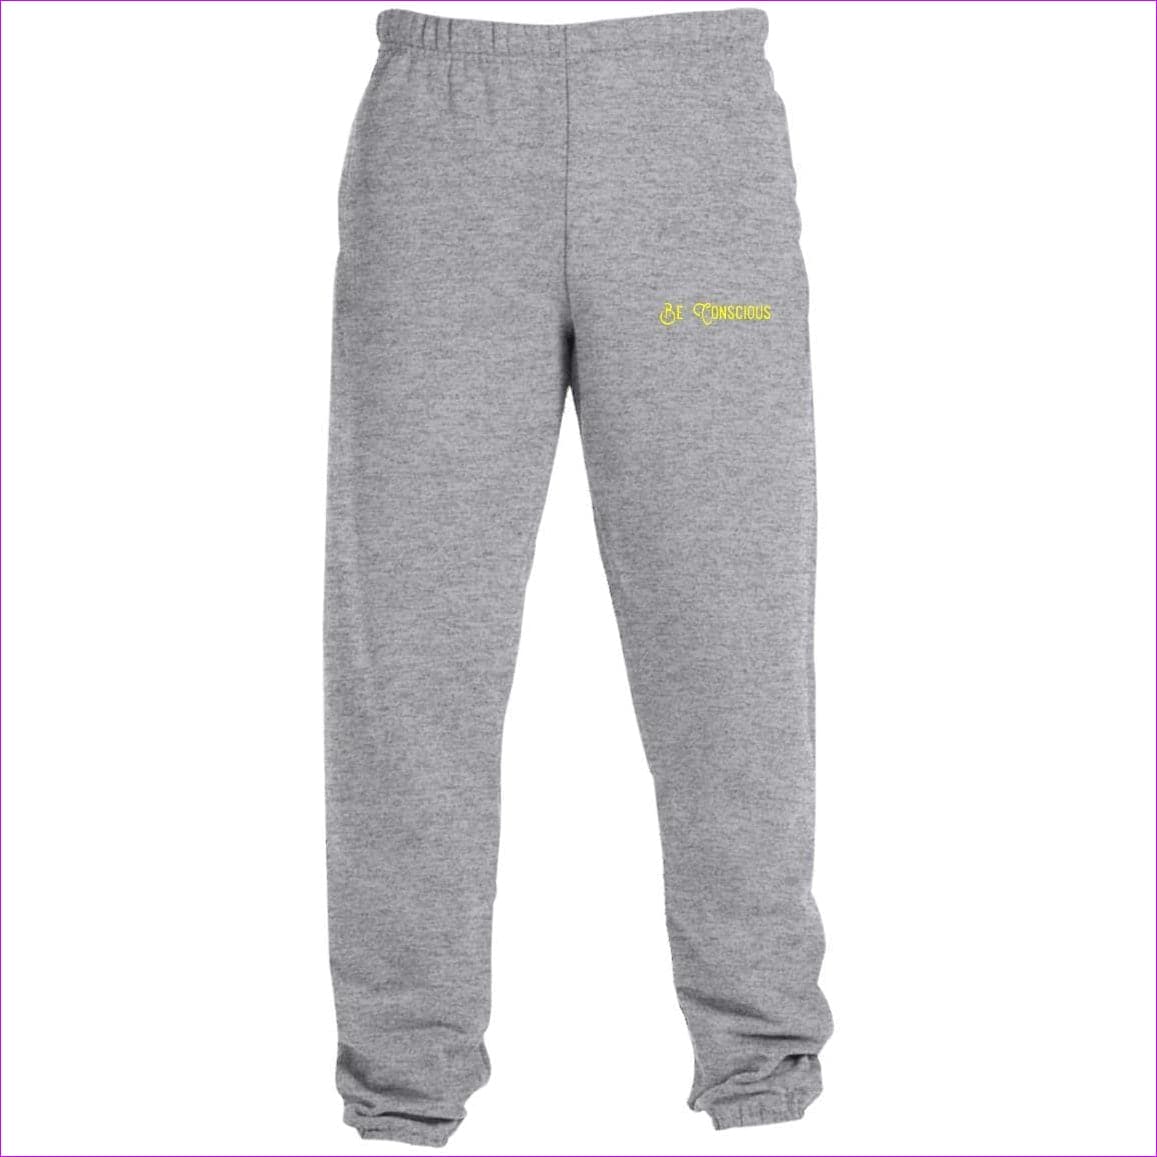 Oxford Grey Be Conscious Sweatpants with Pockets - men's sweatpants at TFC&H Co.